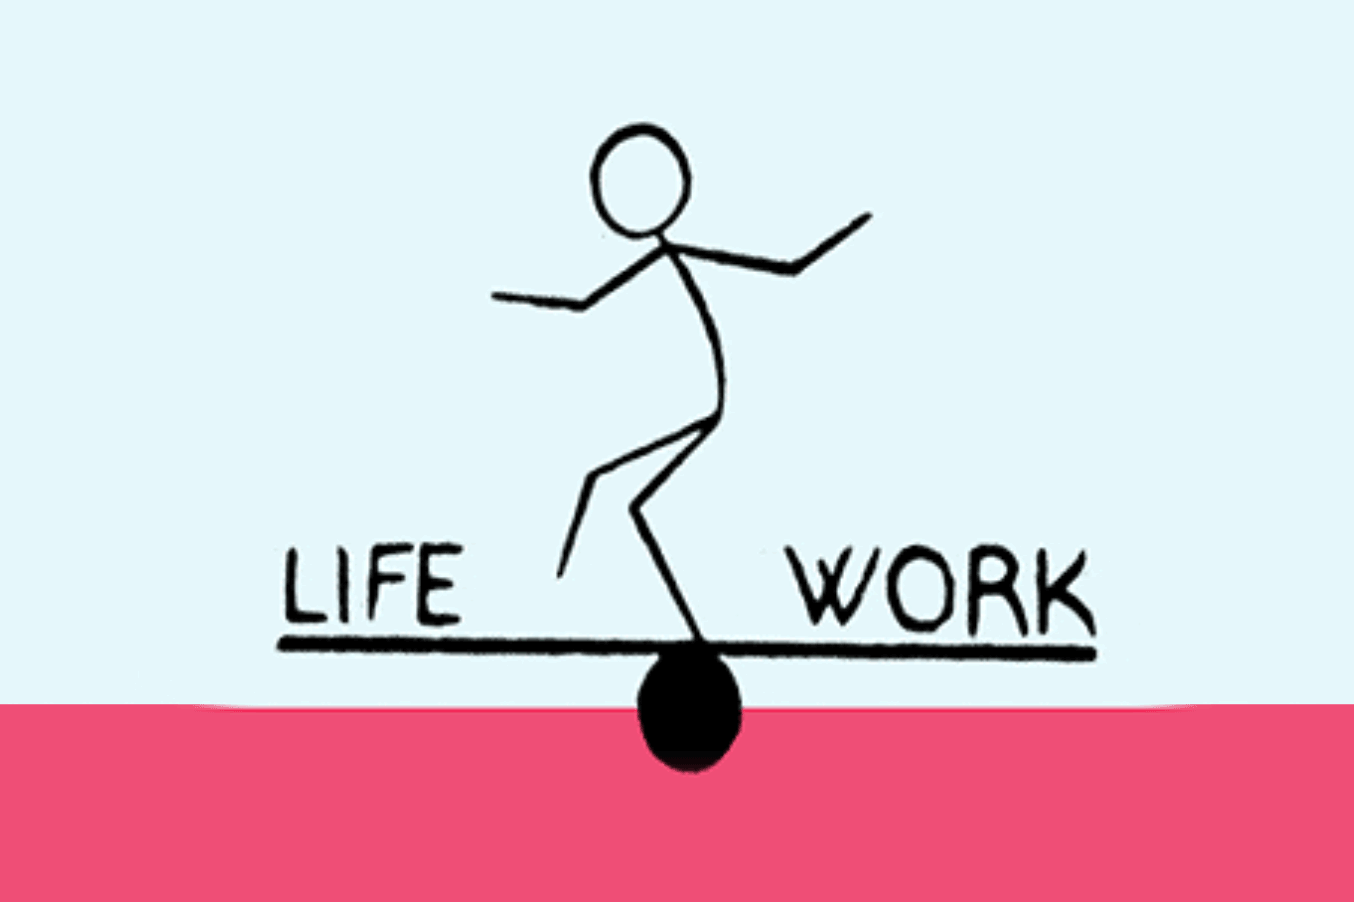 Why leaders should walk the talk on work-life balance